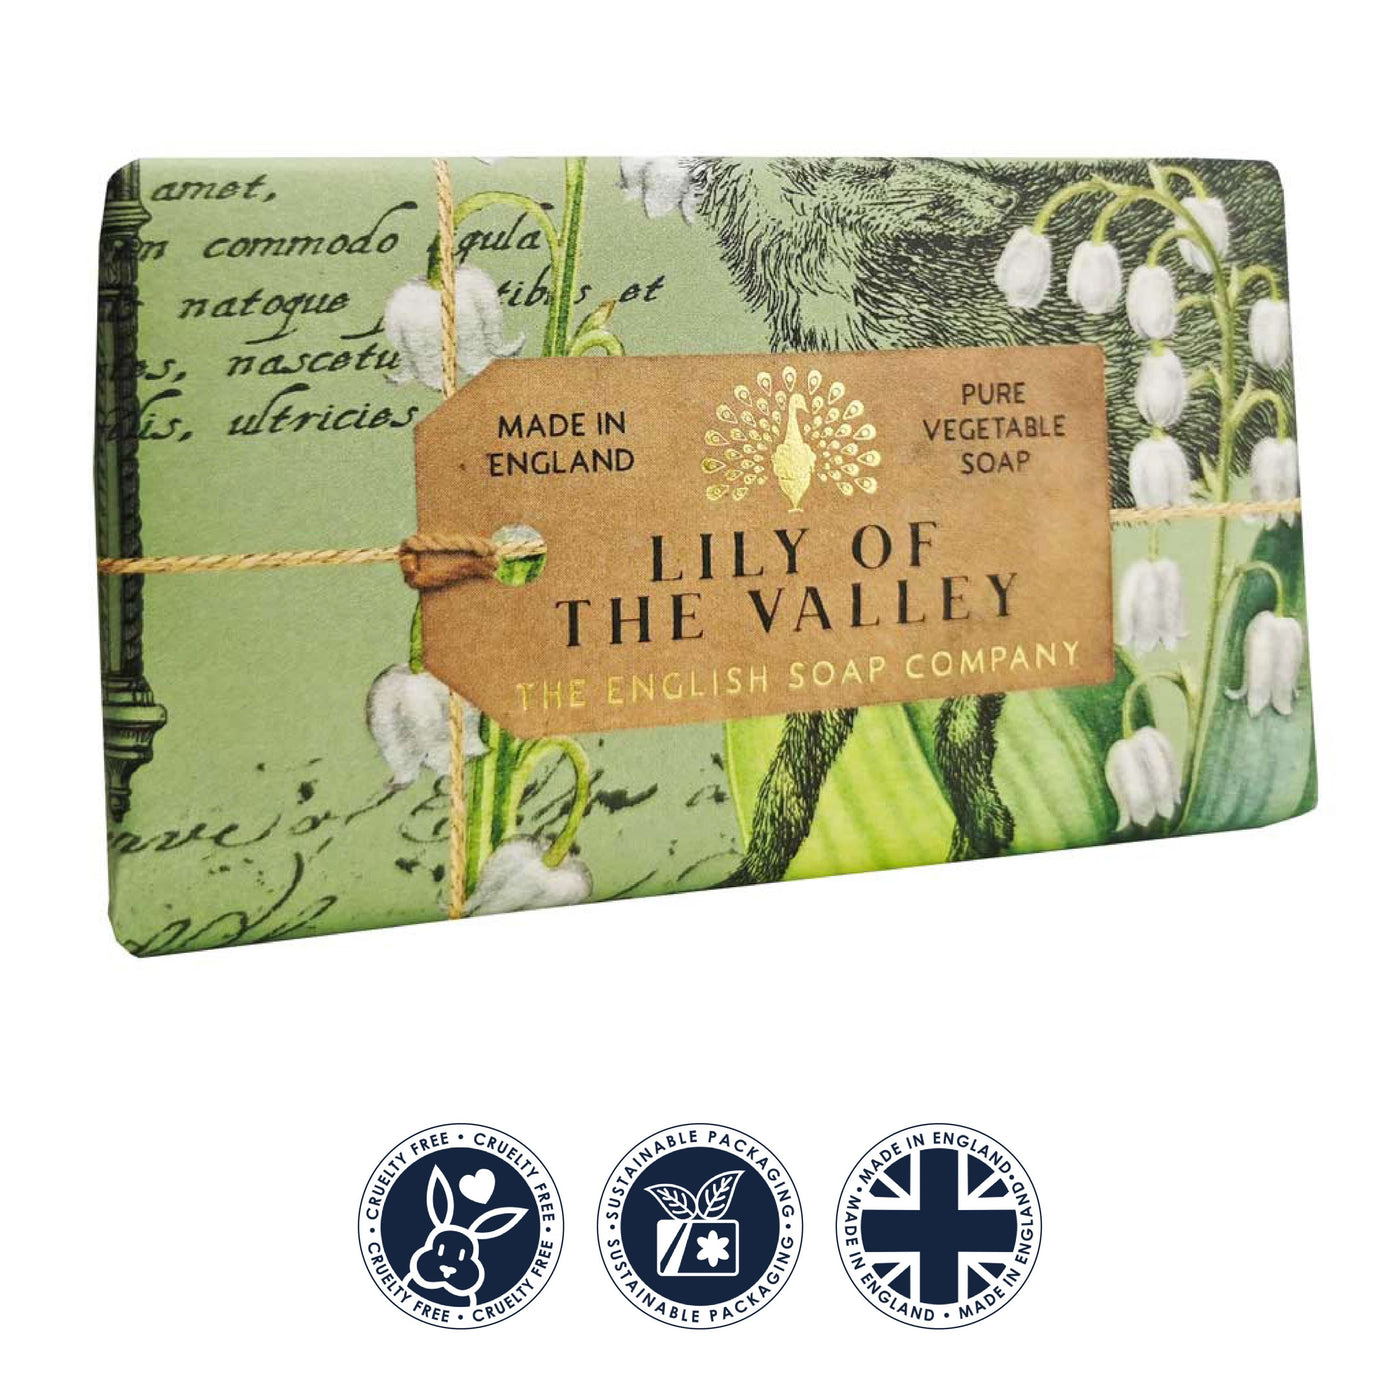 Anniversary Lily of the Valley Soap Bar from our Luxury Bar Soap collection by The English Soap Company